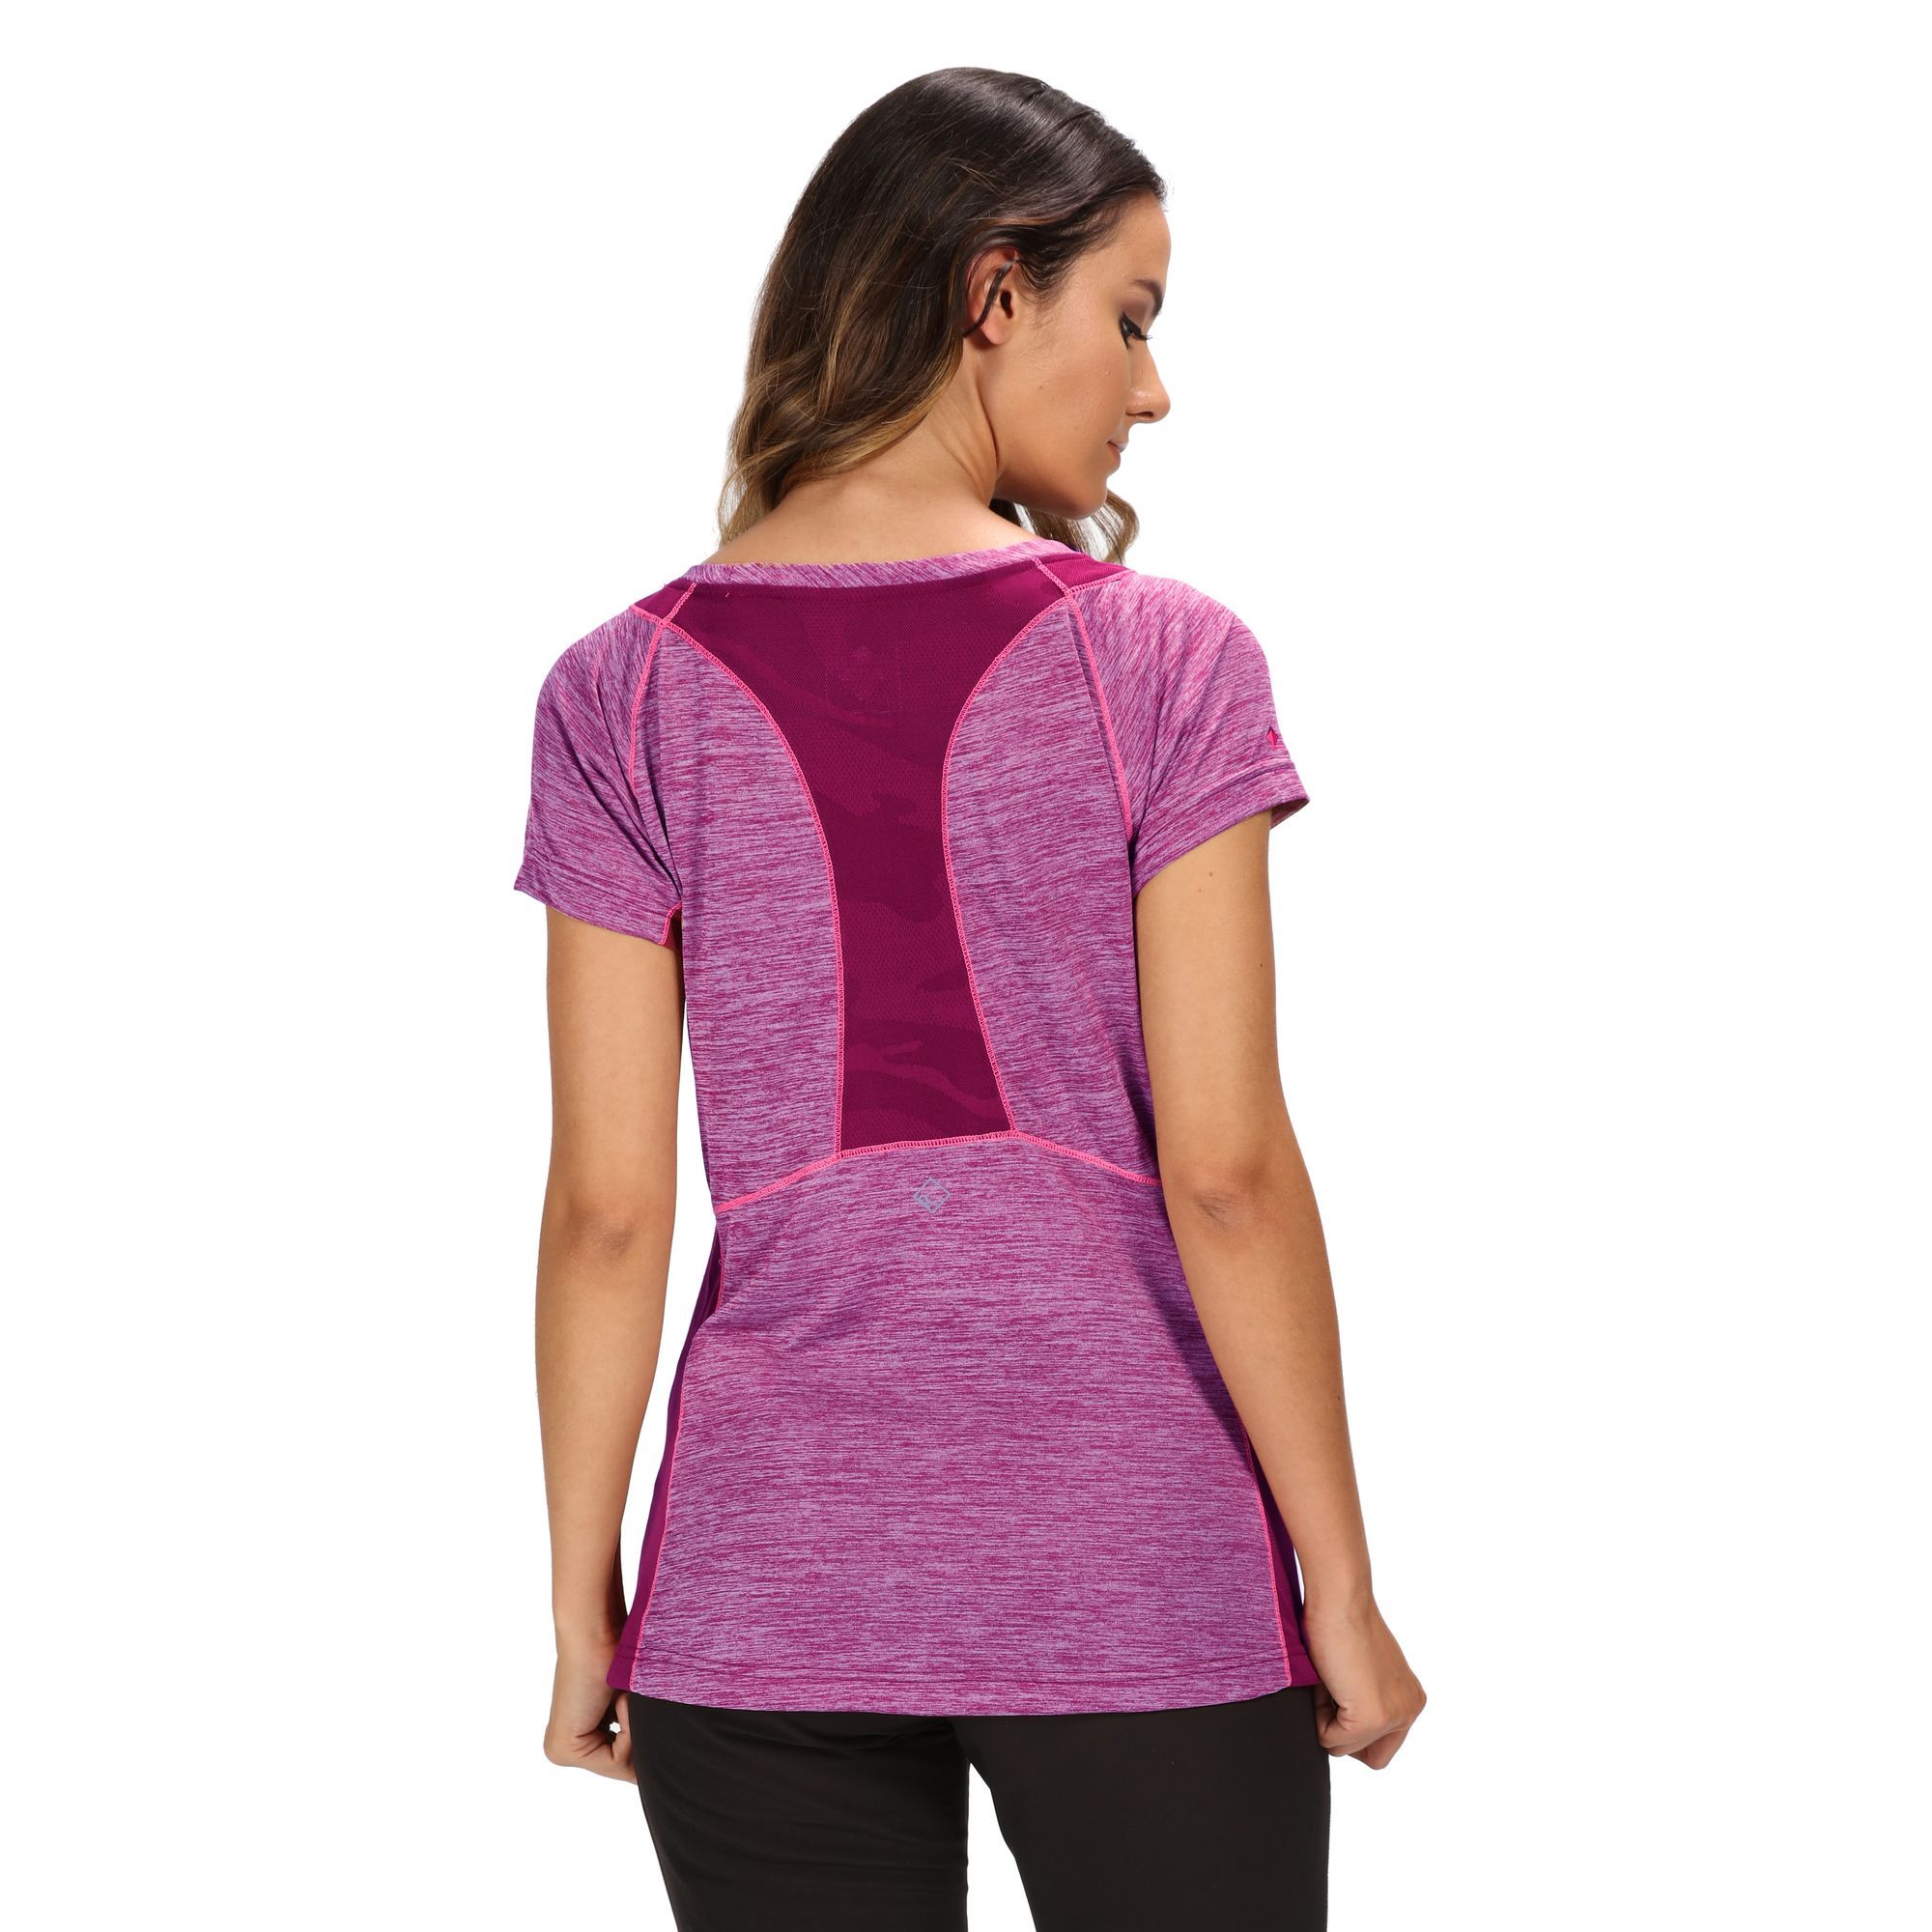 Made from soft-touch ISOVENT polyester knit fabric that stretches, breathes and wicks moisture. With breathable mesh detailing. Fine mesh panels let your body heat escape and air to circulate. Packs well for travelling. With the Regatta print on the sleeve. Size (chest): (6 UK) 30in, (8 UK) 32in, (10 UK) 34in, (12 UK) 36in, (14 UK) 38in, (16 UK) 40in, (18 UK) 43in, (20 UK) 45in, (22 UK) 48in, (24 UK) 50in, (28 UK) 54in, (30 UK) 56in, (32 UK) 58in, (34 UK) 60in, (36 UK) 62in.